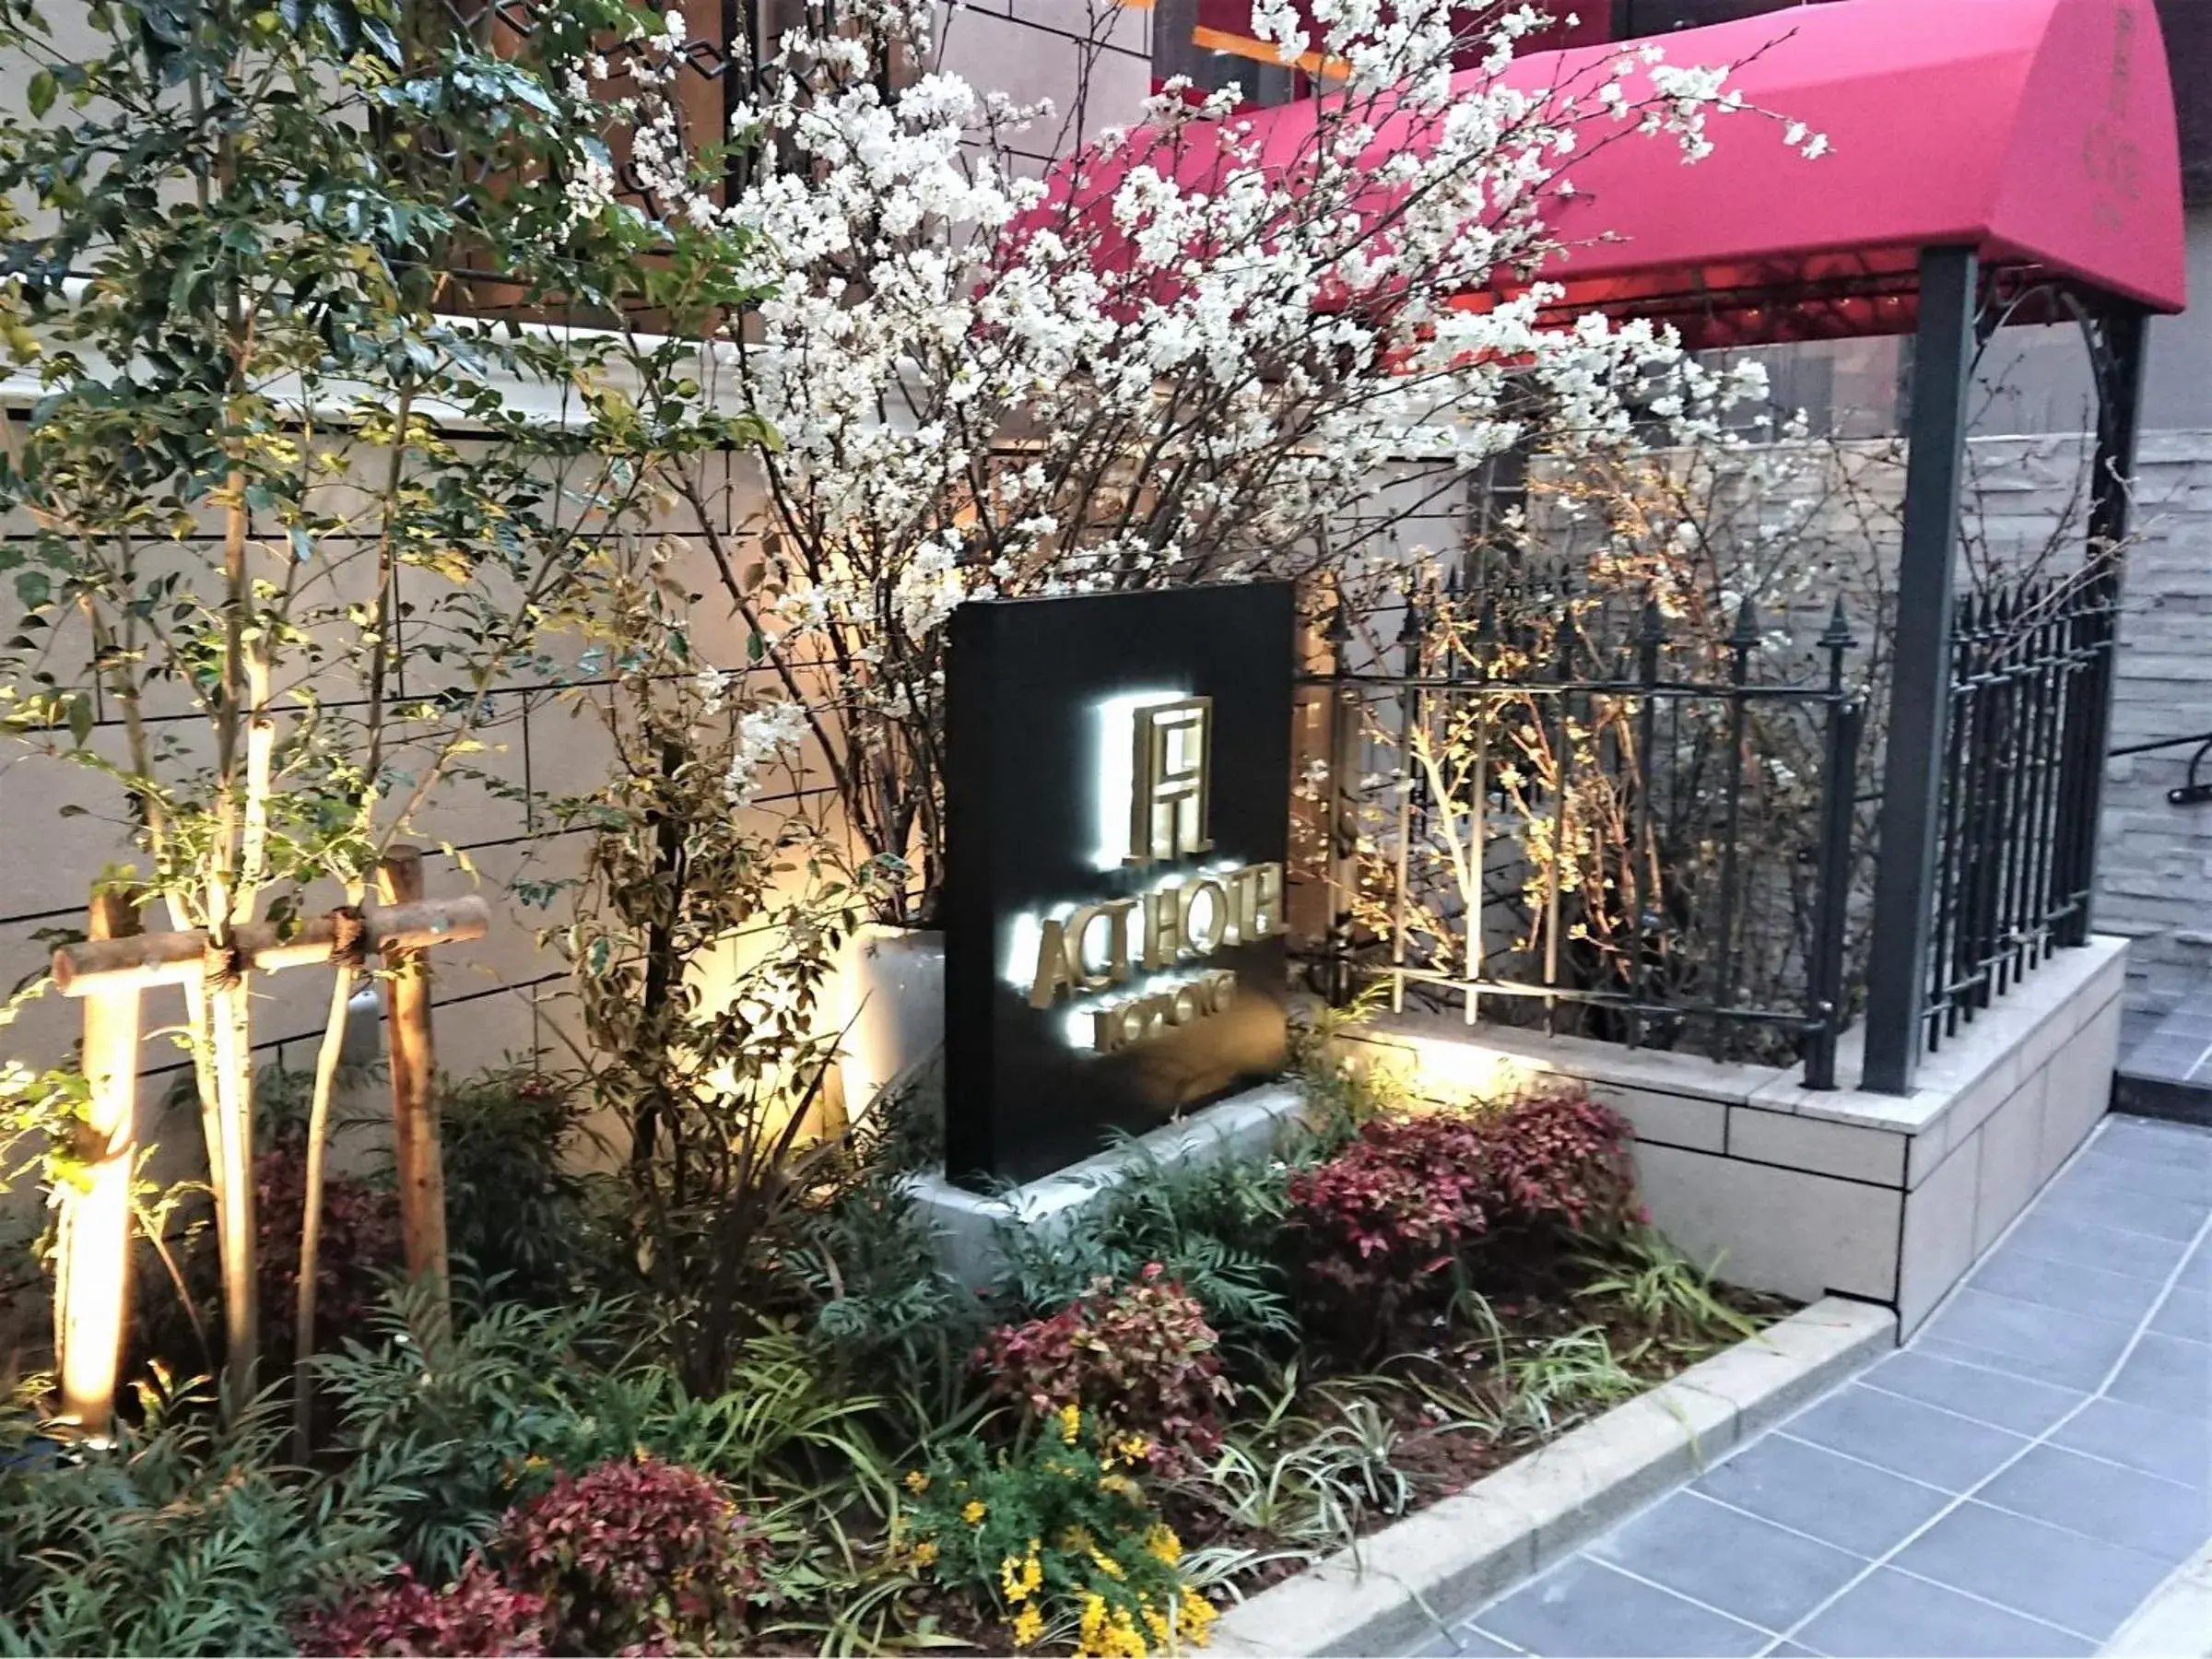 Property building in Act Hotel Roppongi